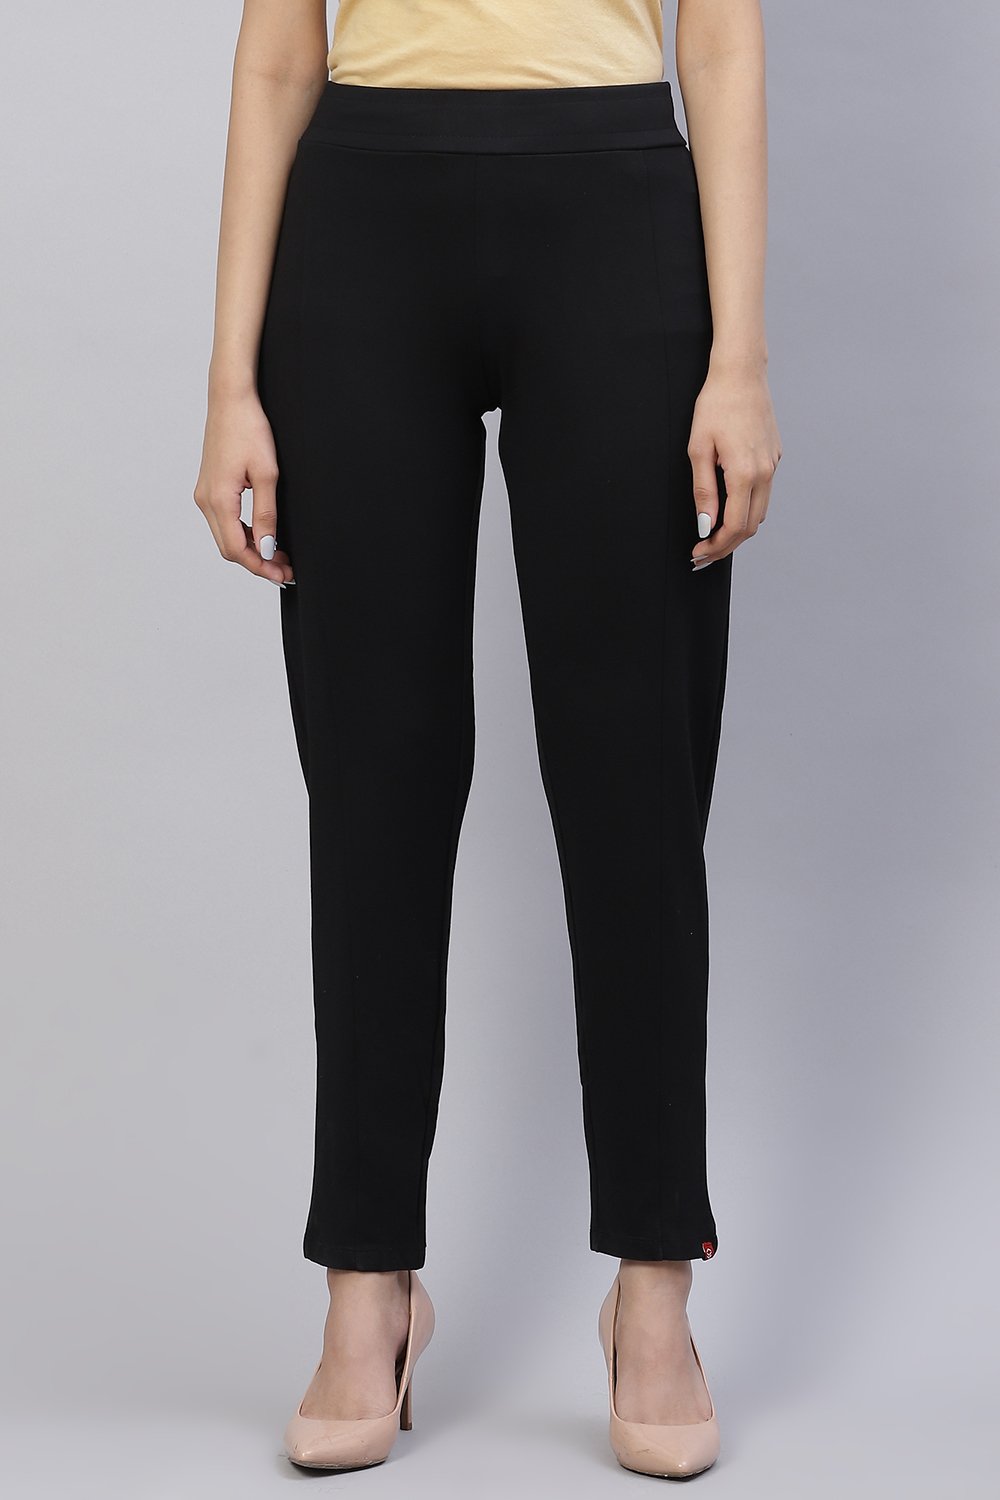 Towny Port Straight Poly Viscose Leggings image number 4